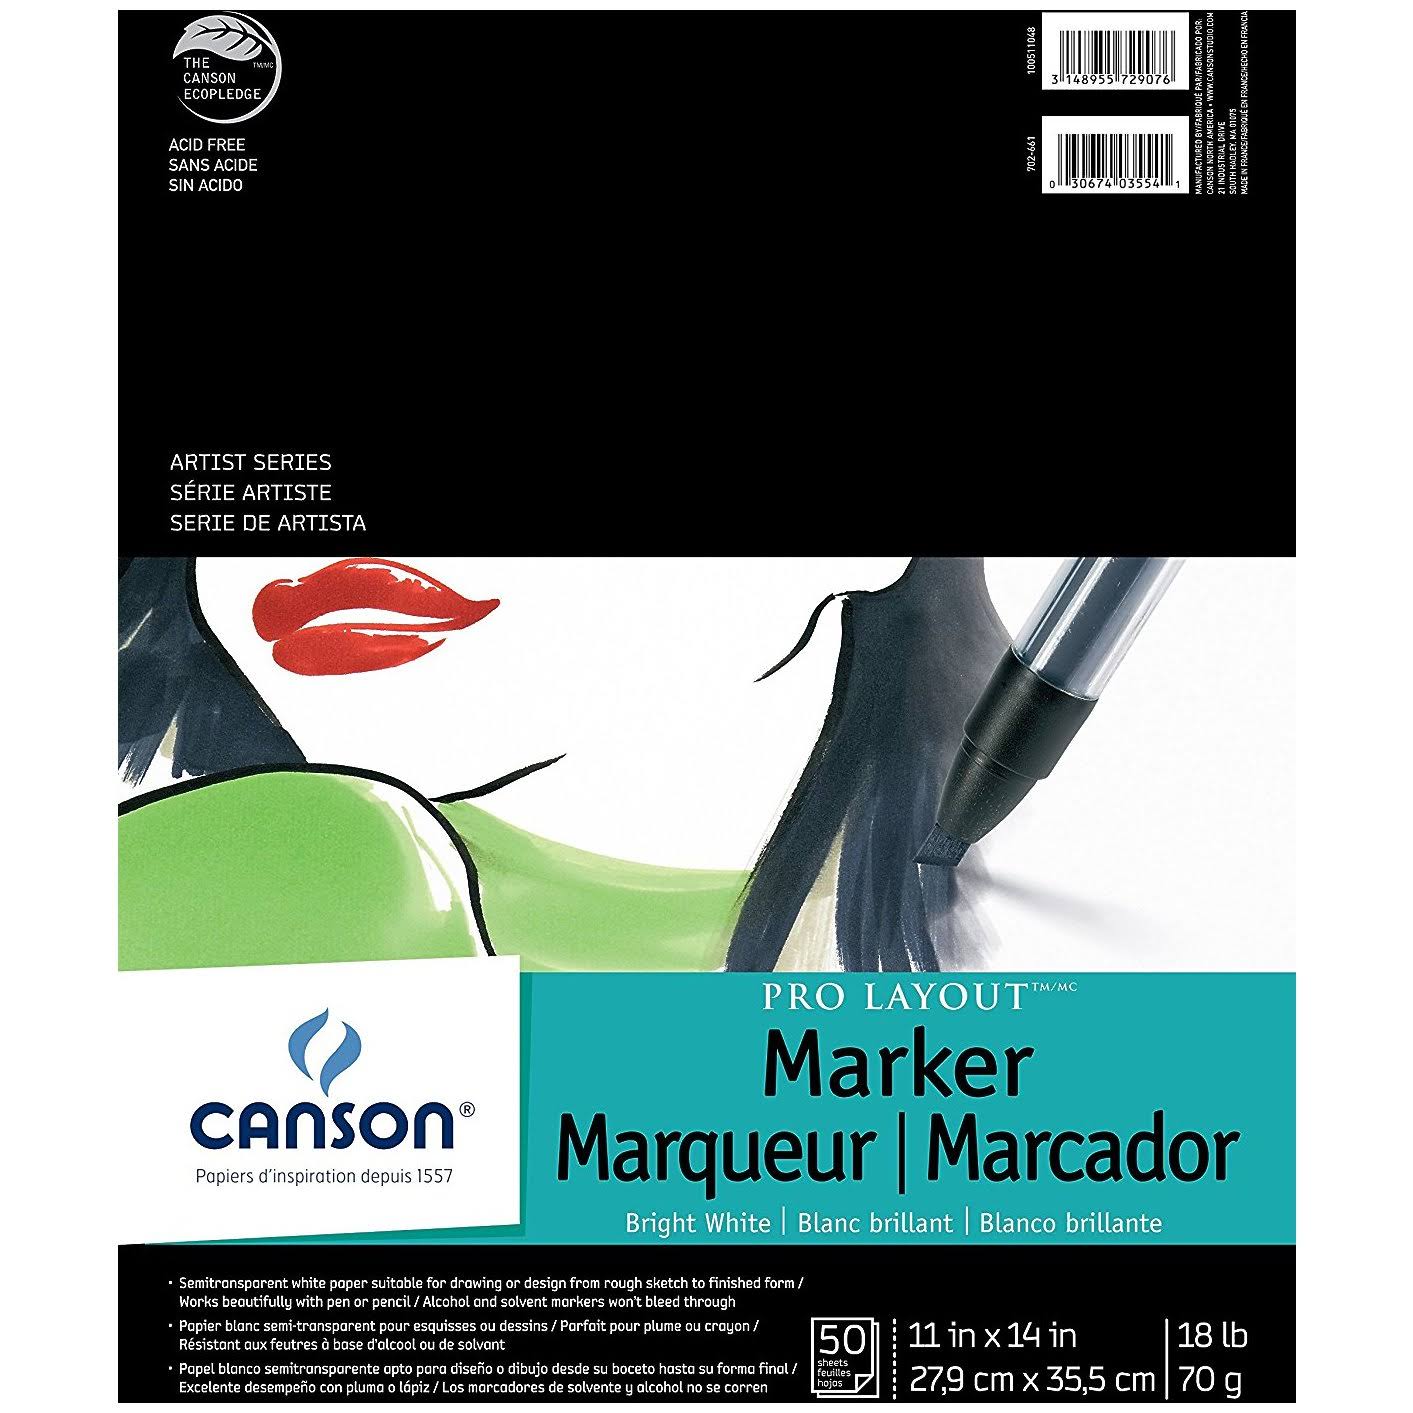 Canson Artist Series Pro Layout Marker Pads - 50 Sheets, 18lb